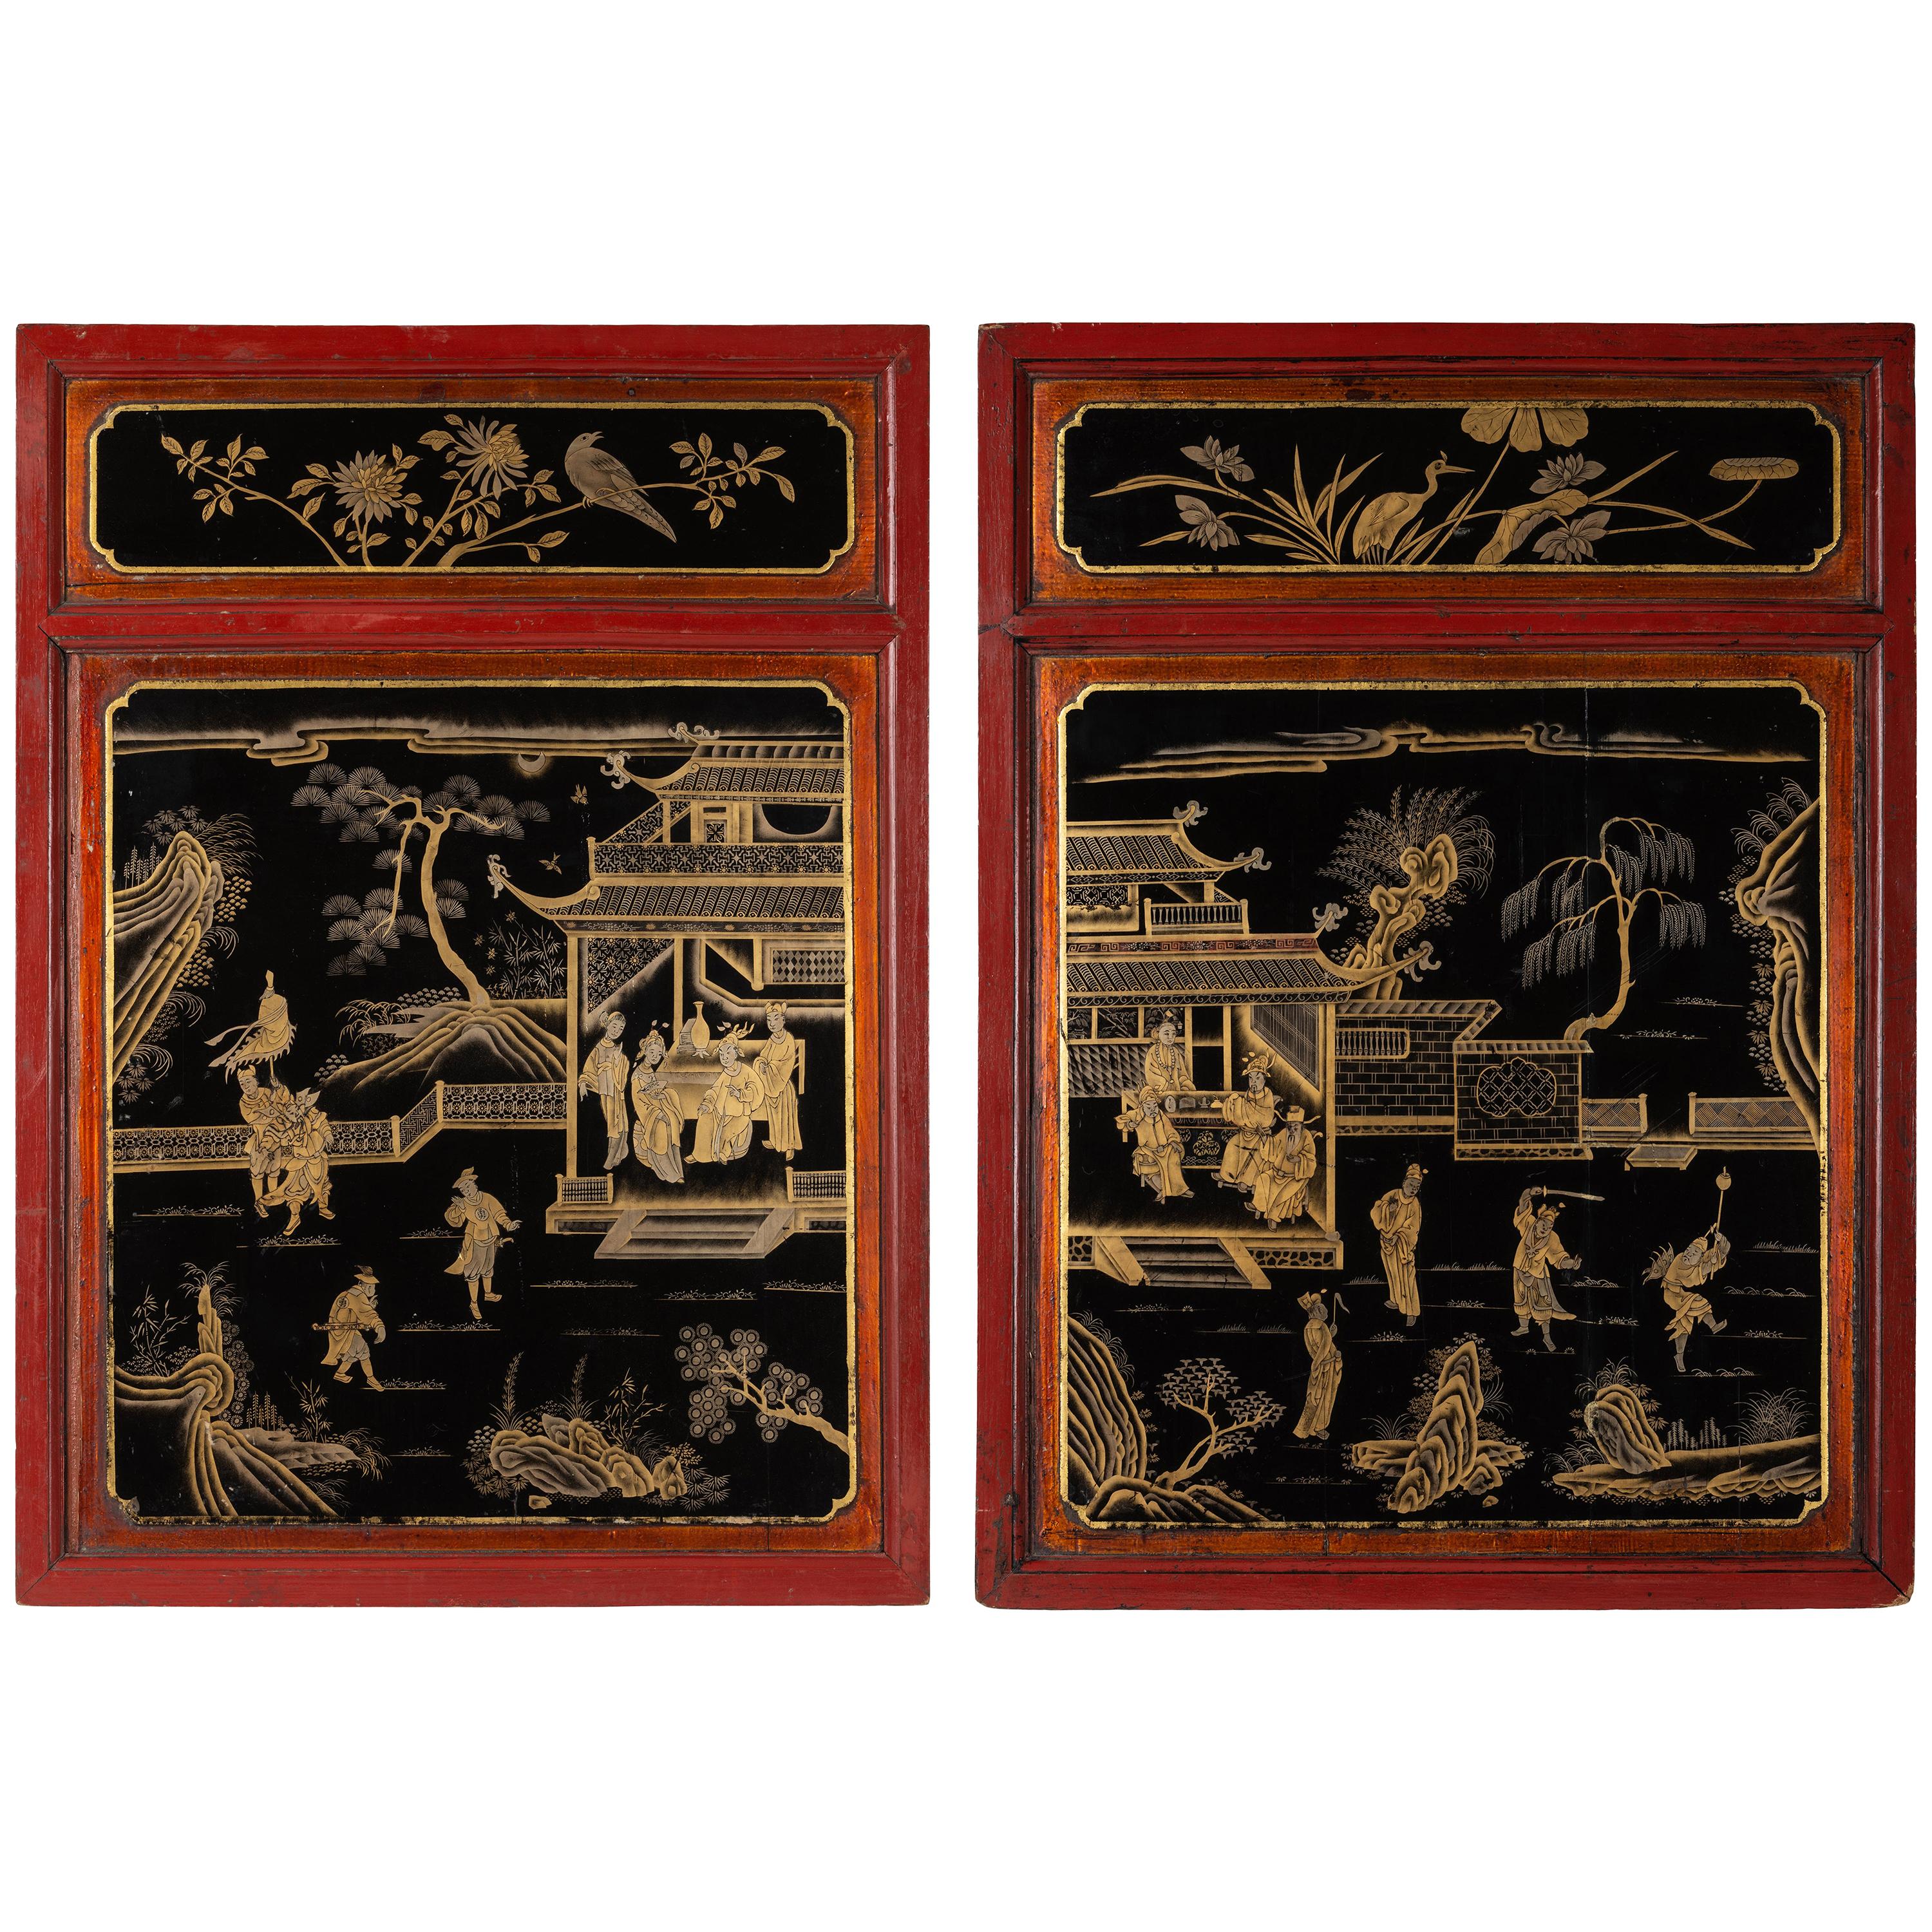 Pair of Chinese Red, Gold and Black Lacquered Panels